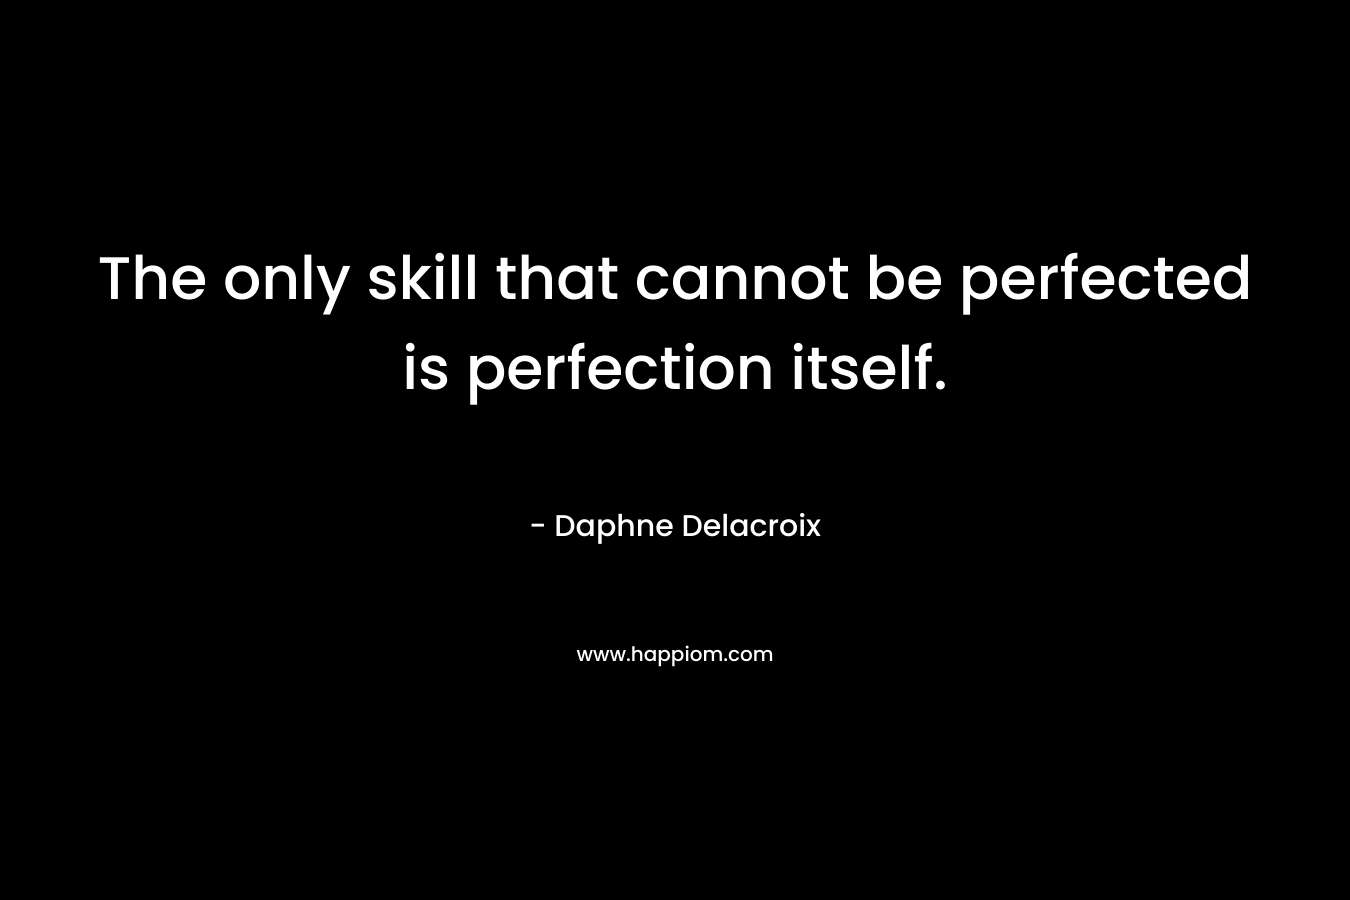 The only skill that cannot be perfected is perfection itself. – Daphne Delacroix